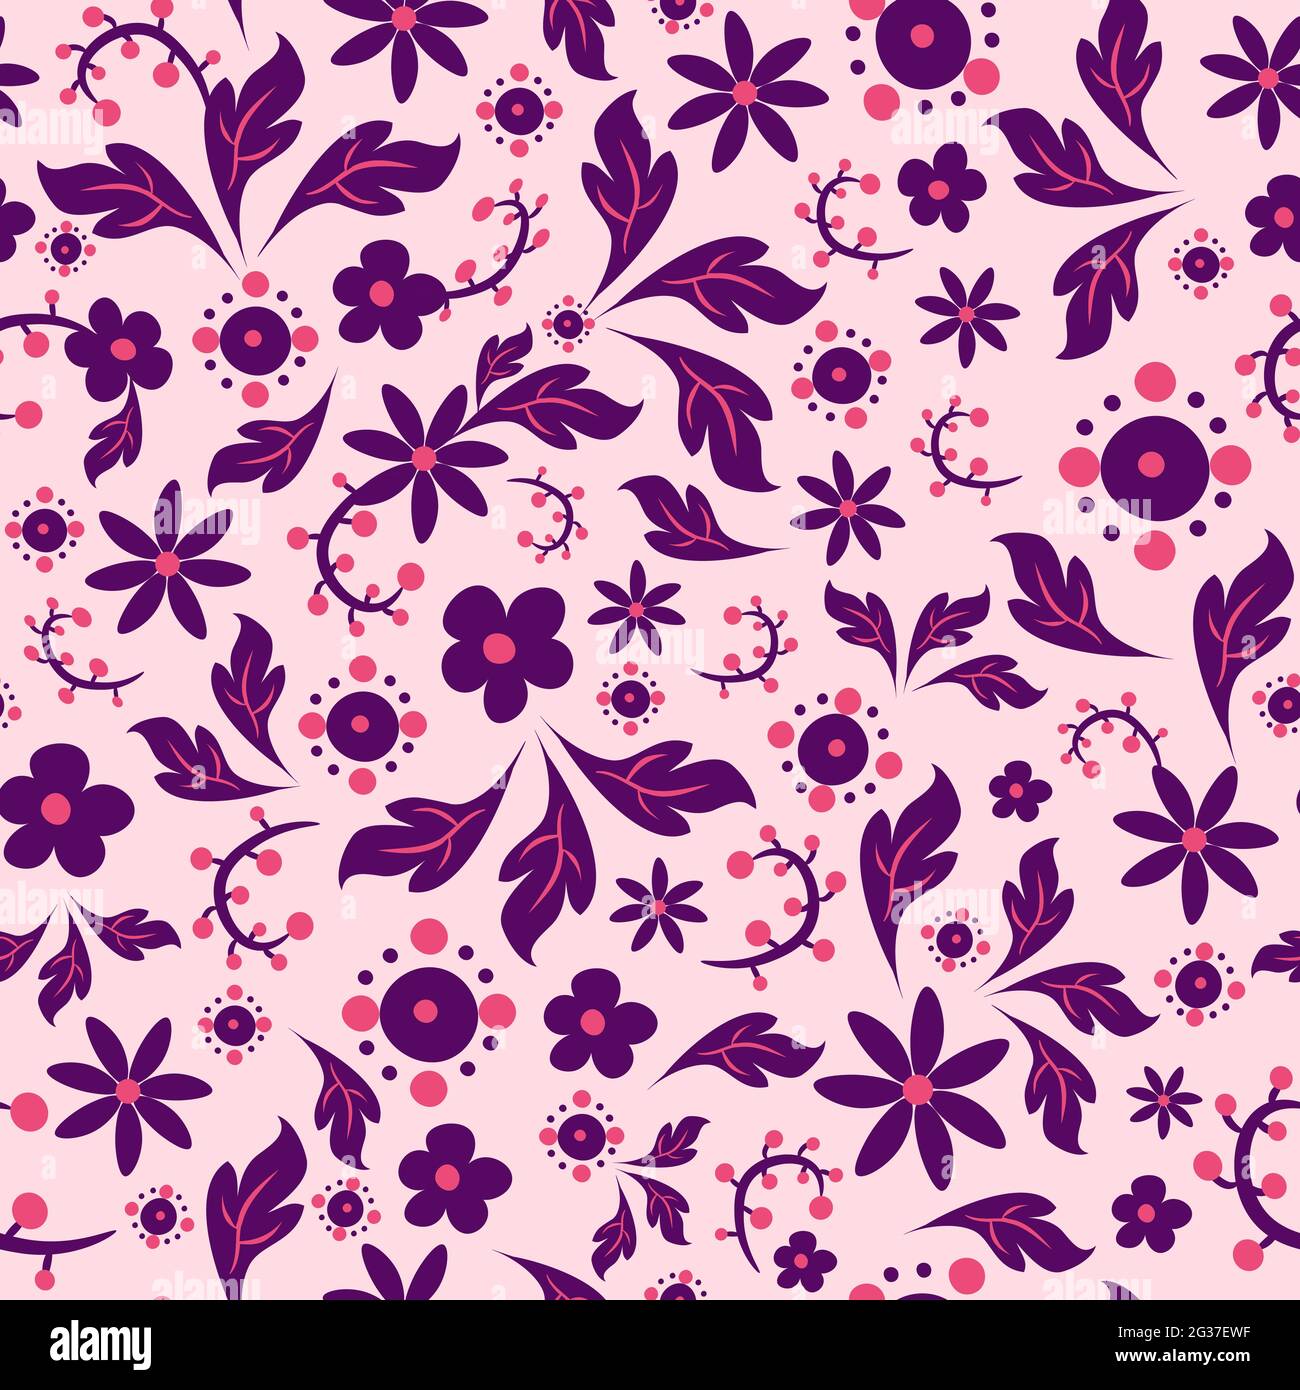 Pink and purple seamless pattern inspired by balkan folk motifs. Repetitive background with polish and hungarian ethnic elements. Stock Vector